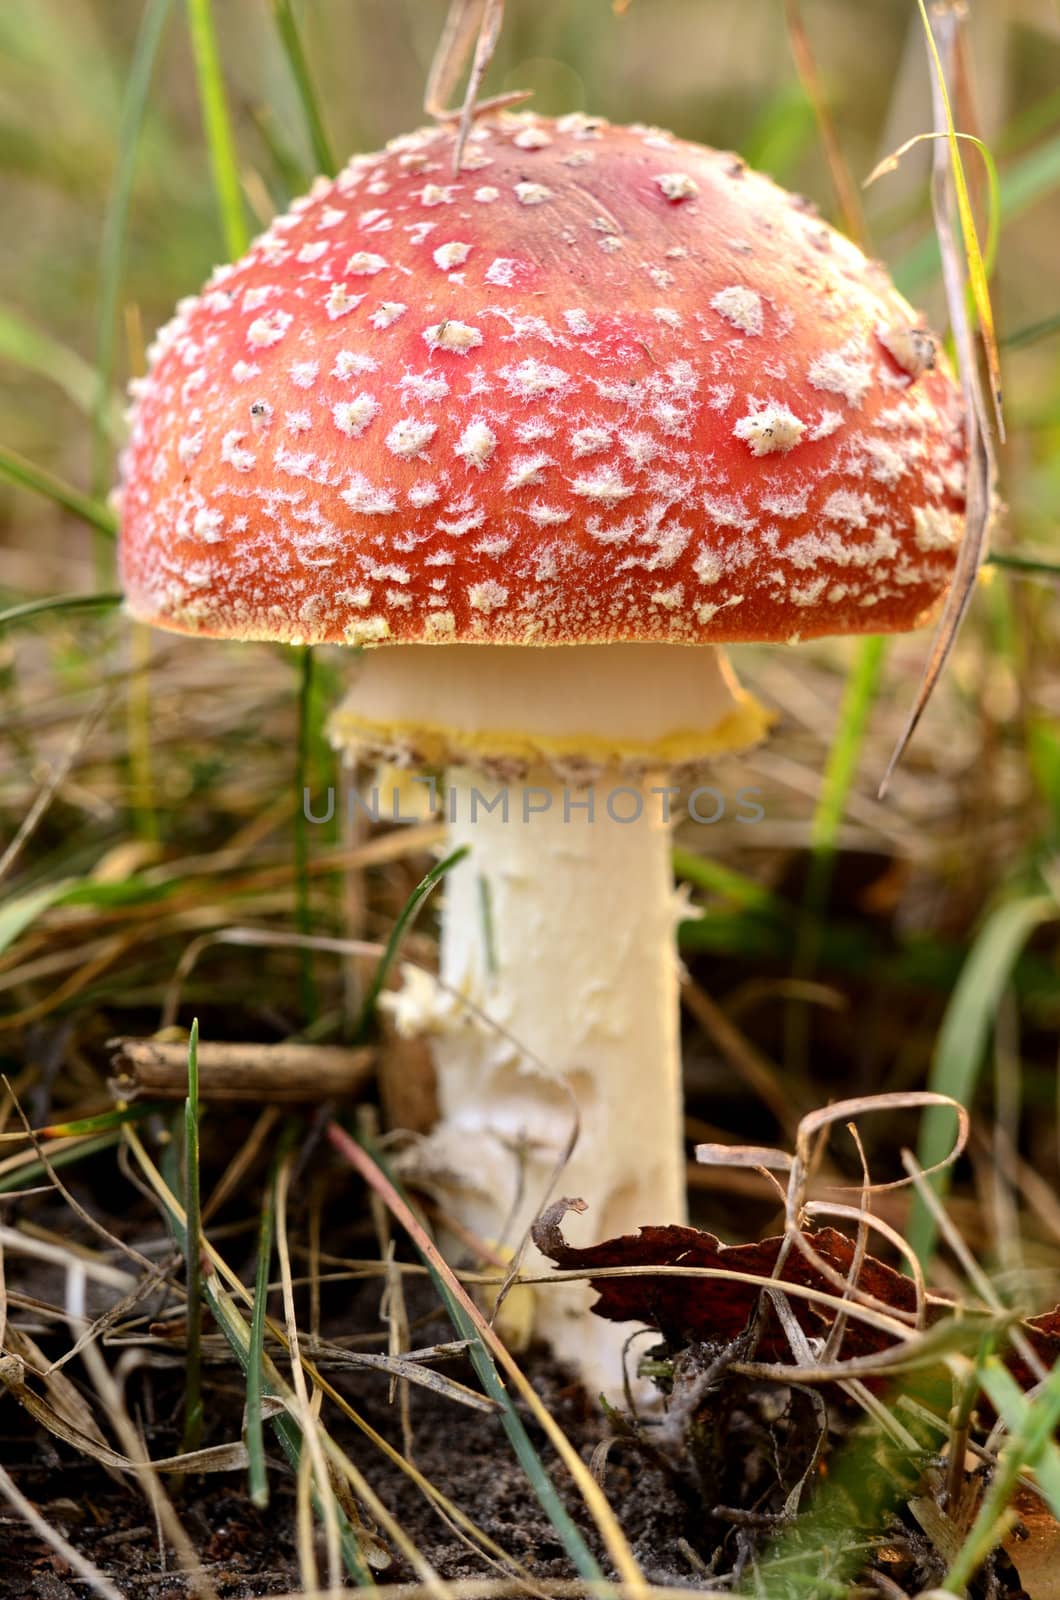 Photo shows the colorful autumn toadstool.